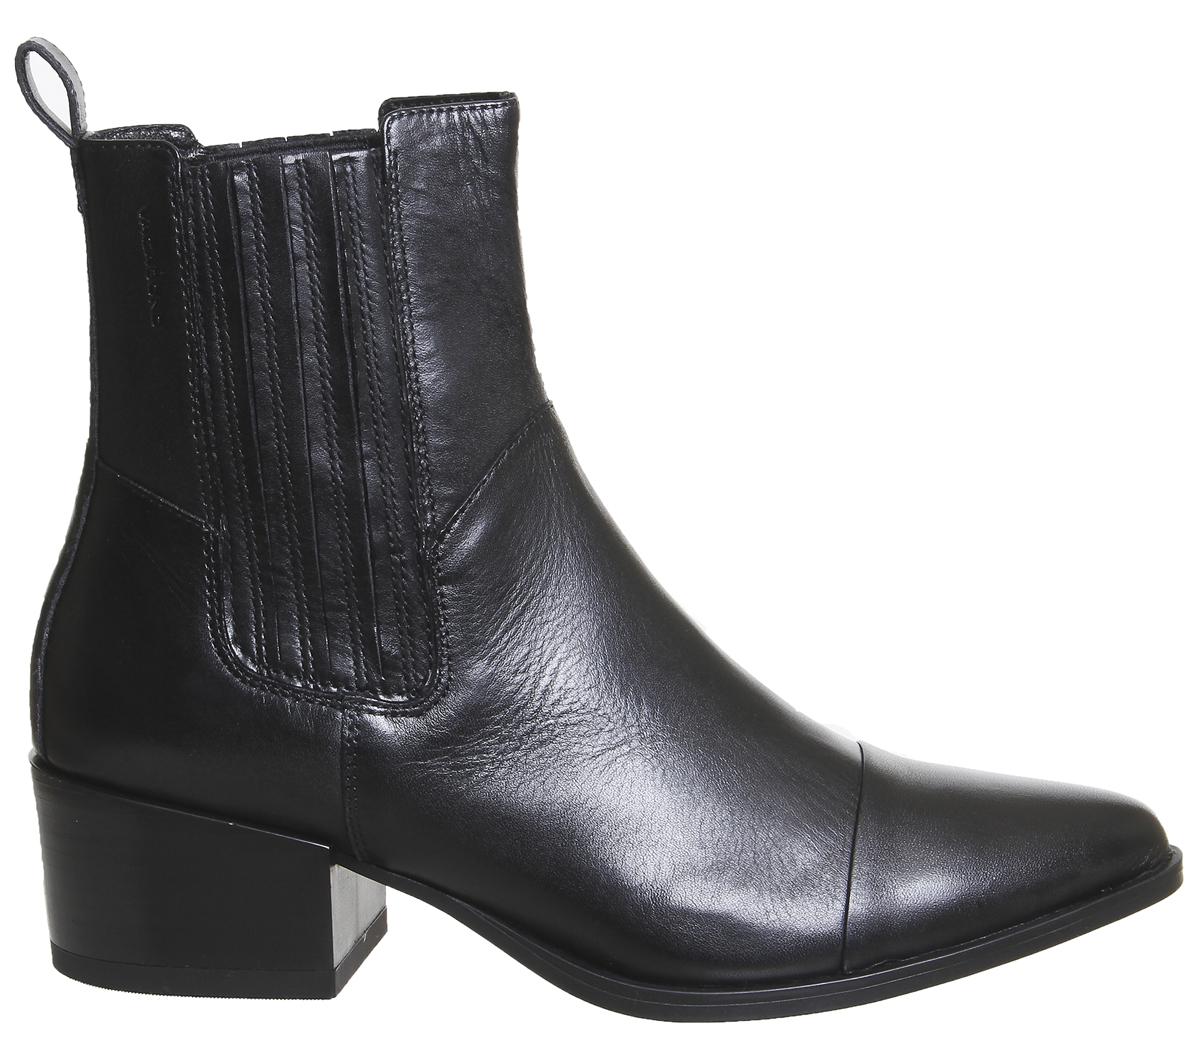 Vagabond Leather Marja Chelsea Boots in Black - Lyst